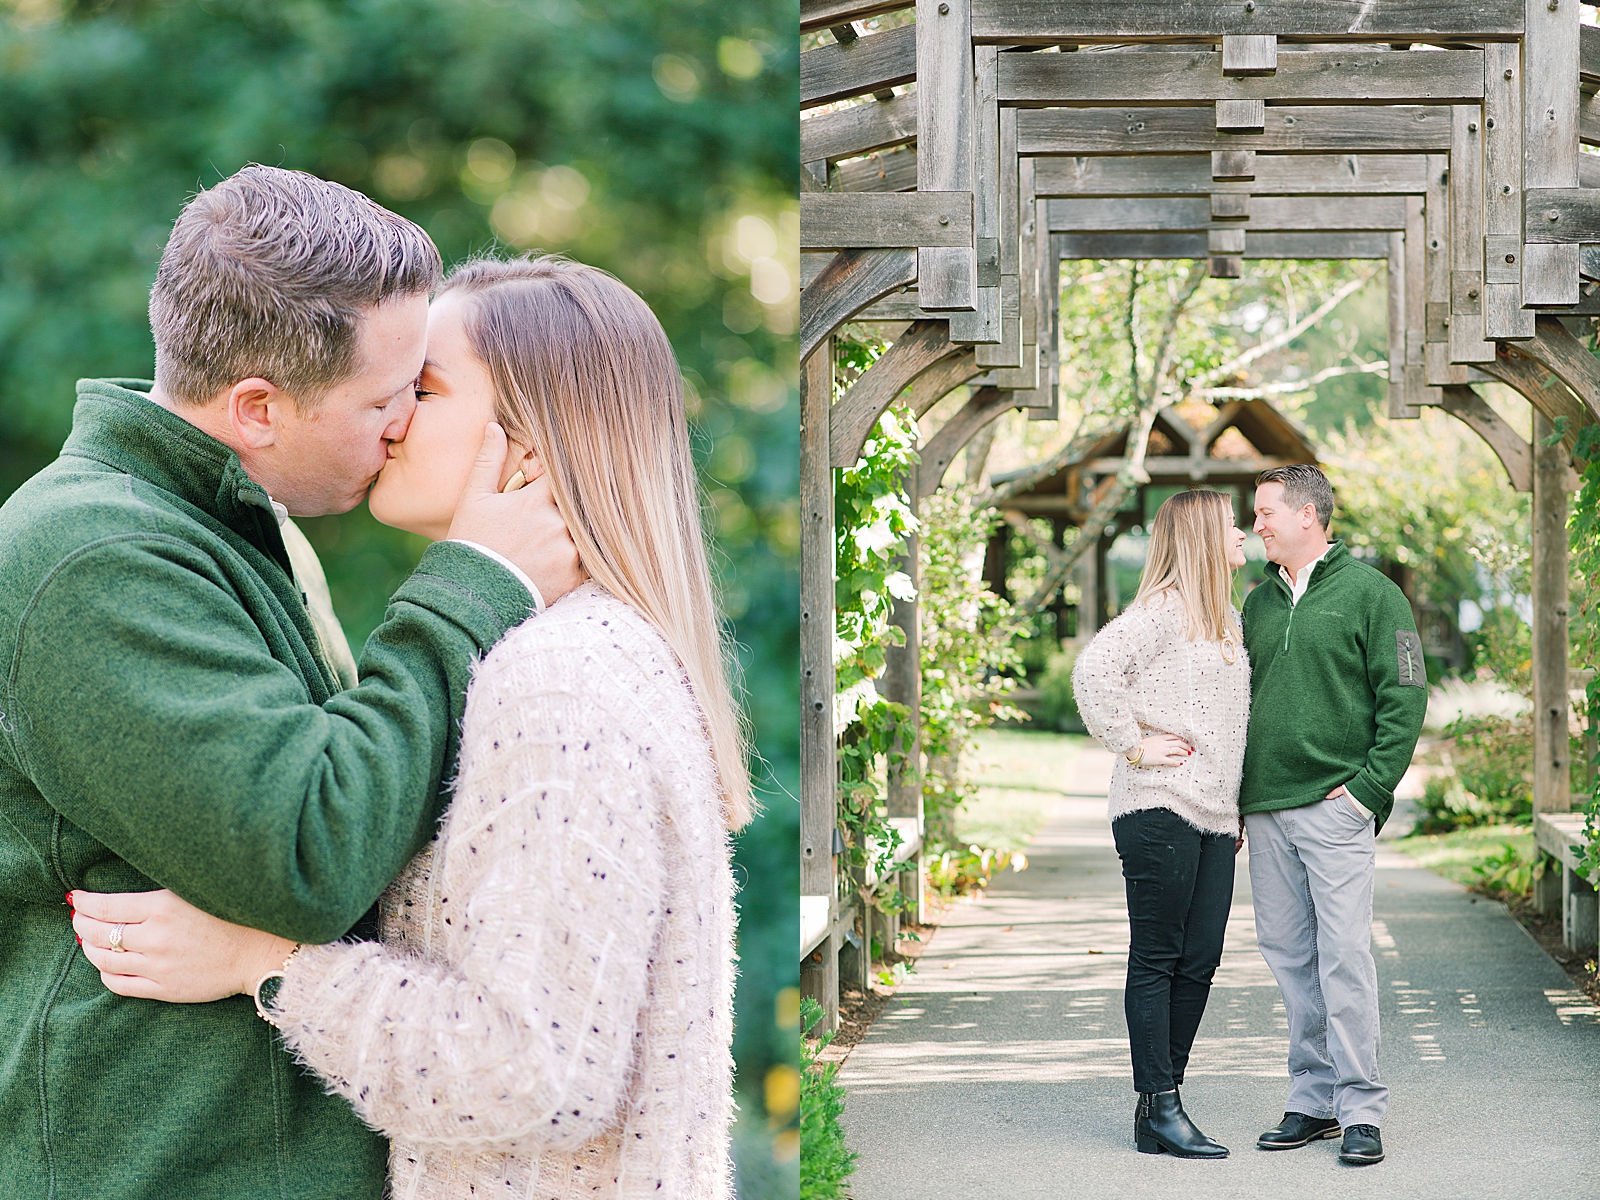 North Carolina Arboretum Couple Kissing and Smiling at Each other Photos